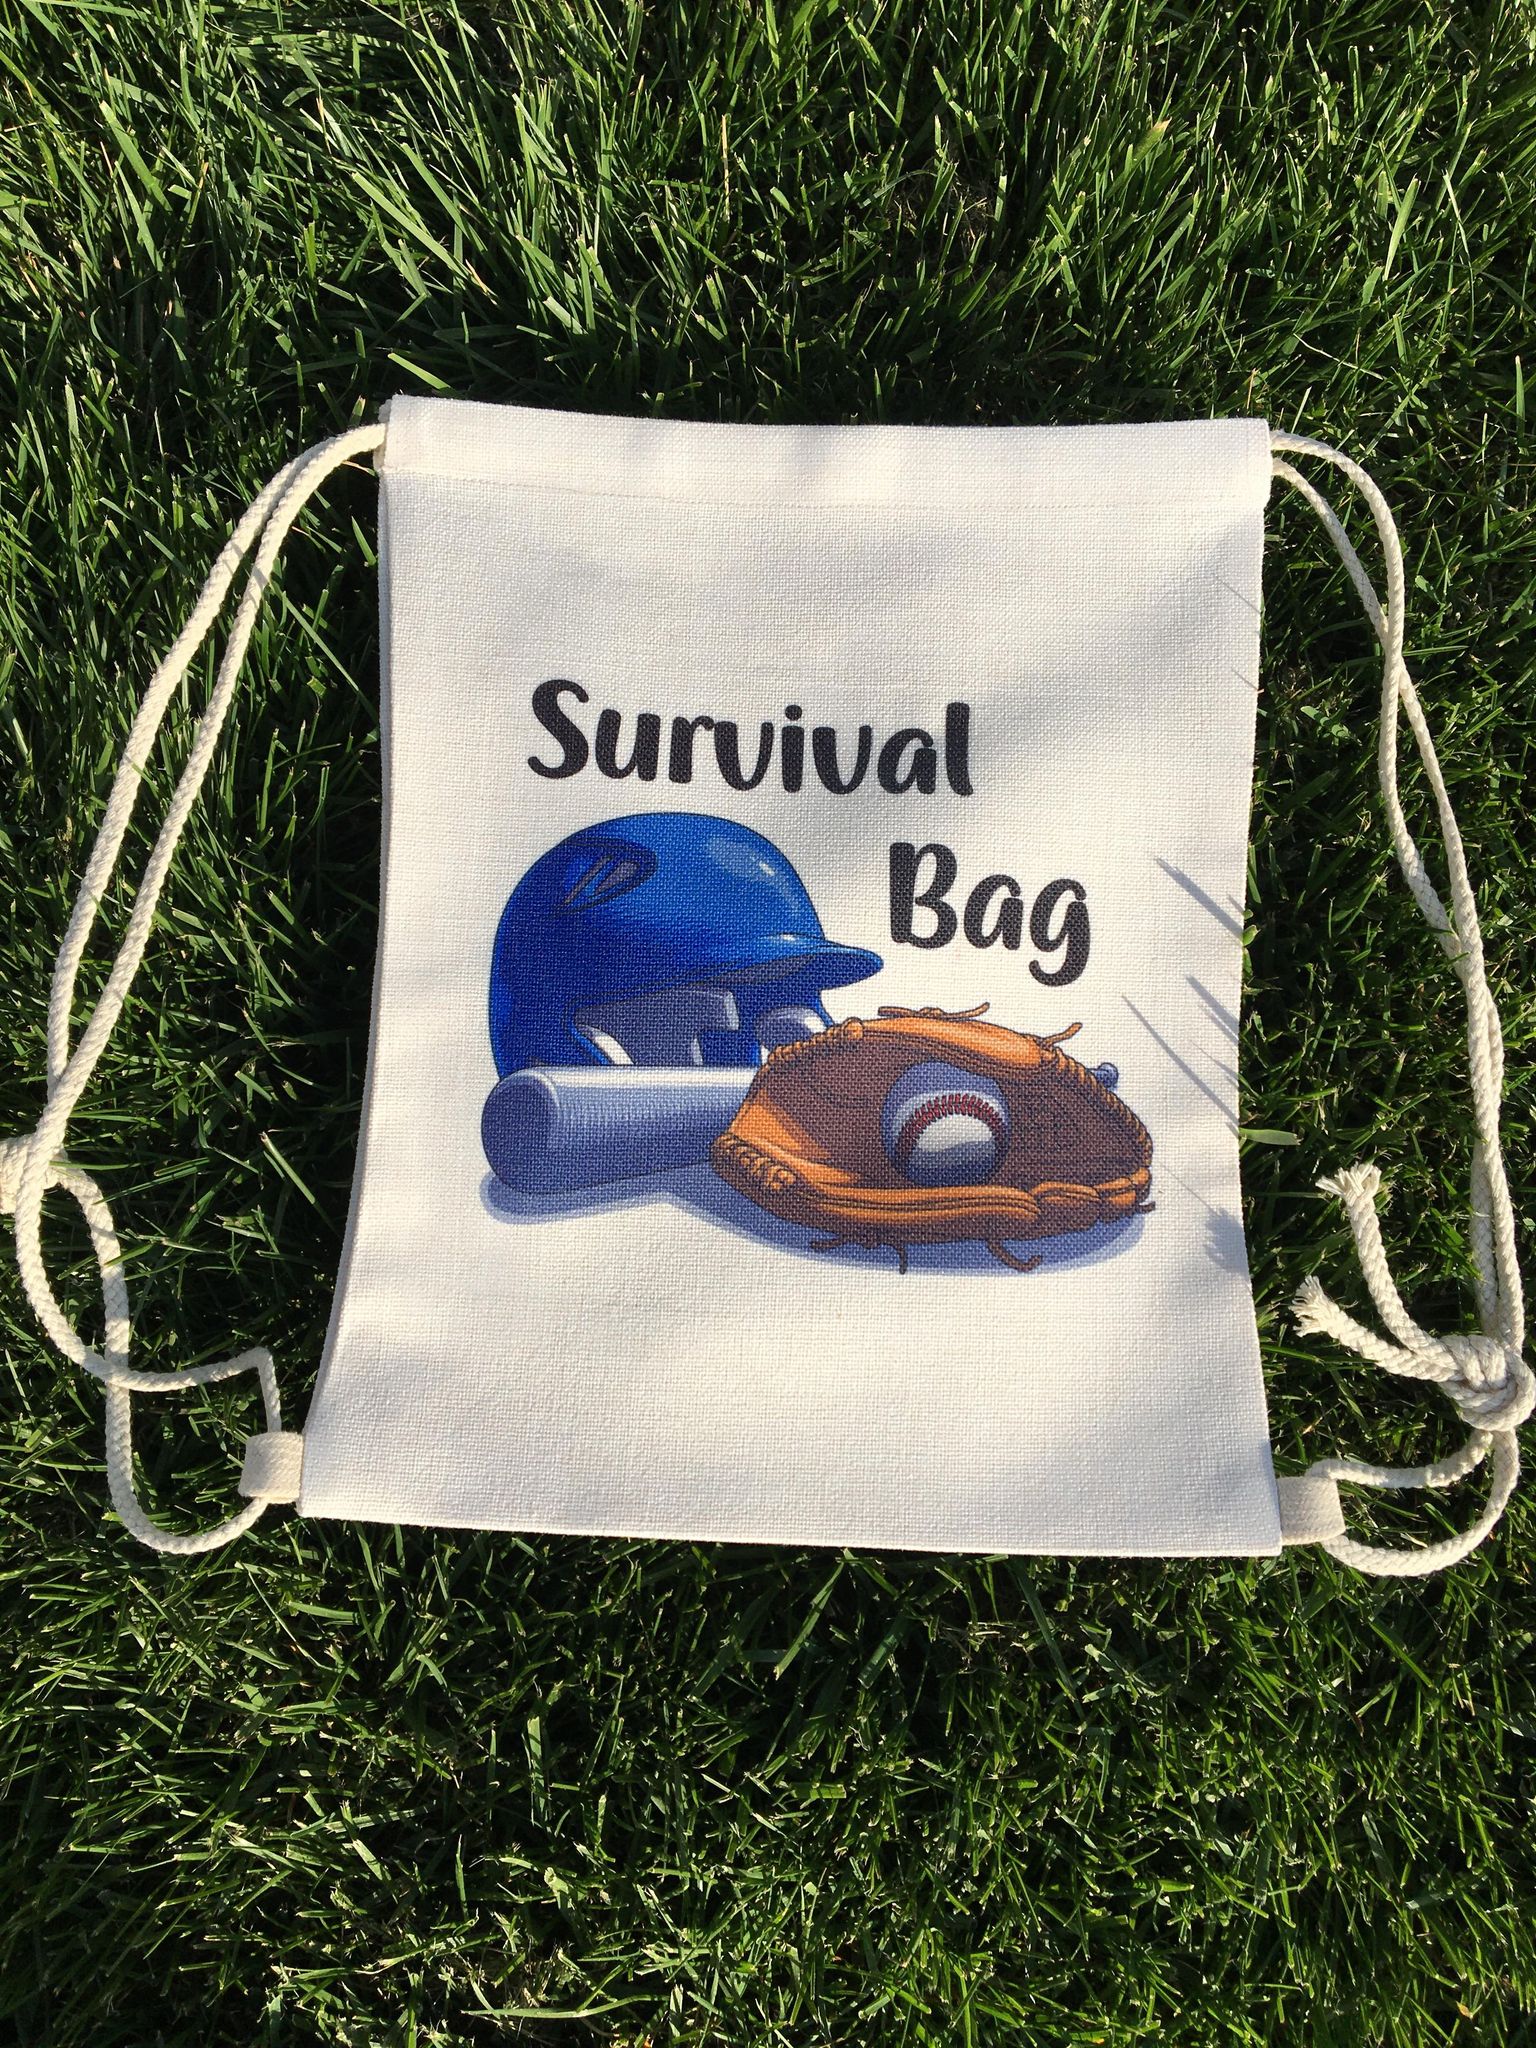 Perfect for a family going to little league sports.   They can carry snacks and small items to 